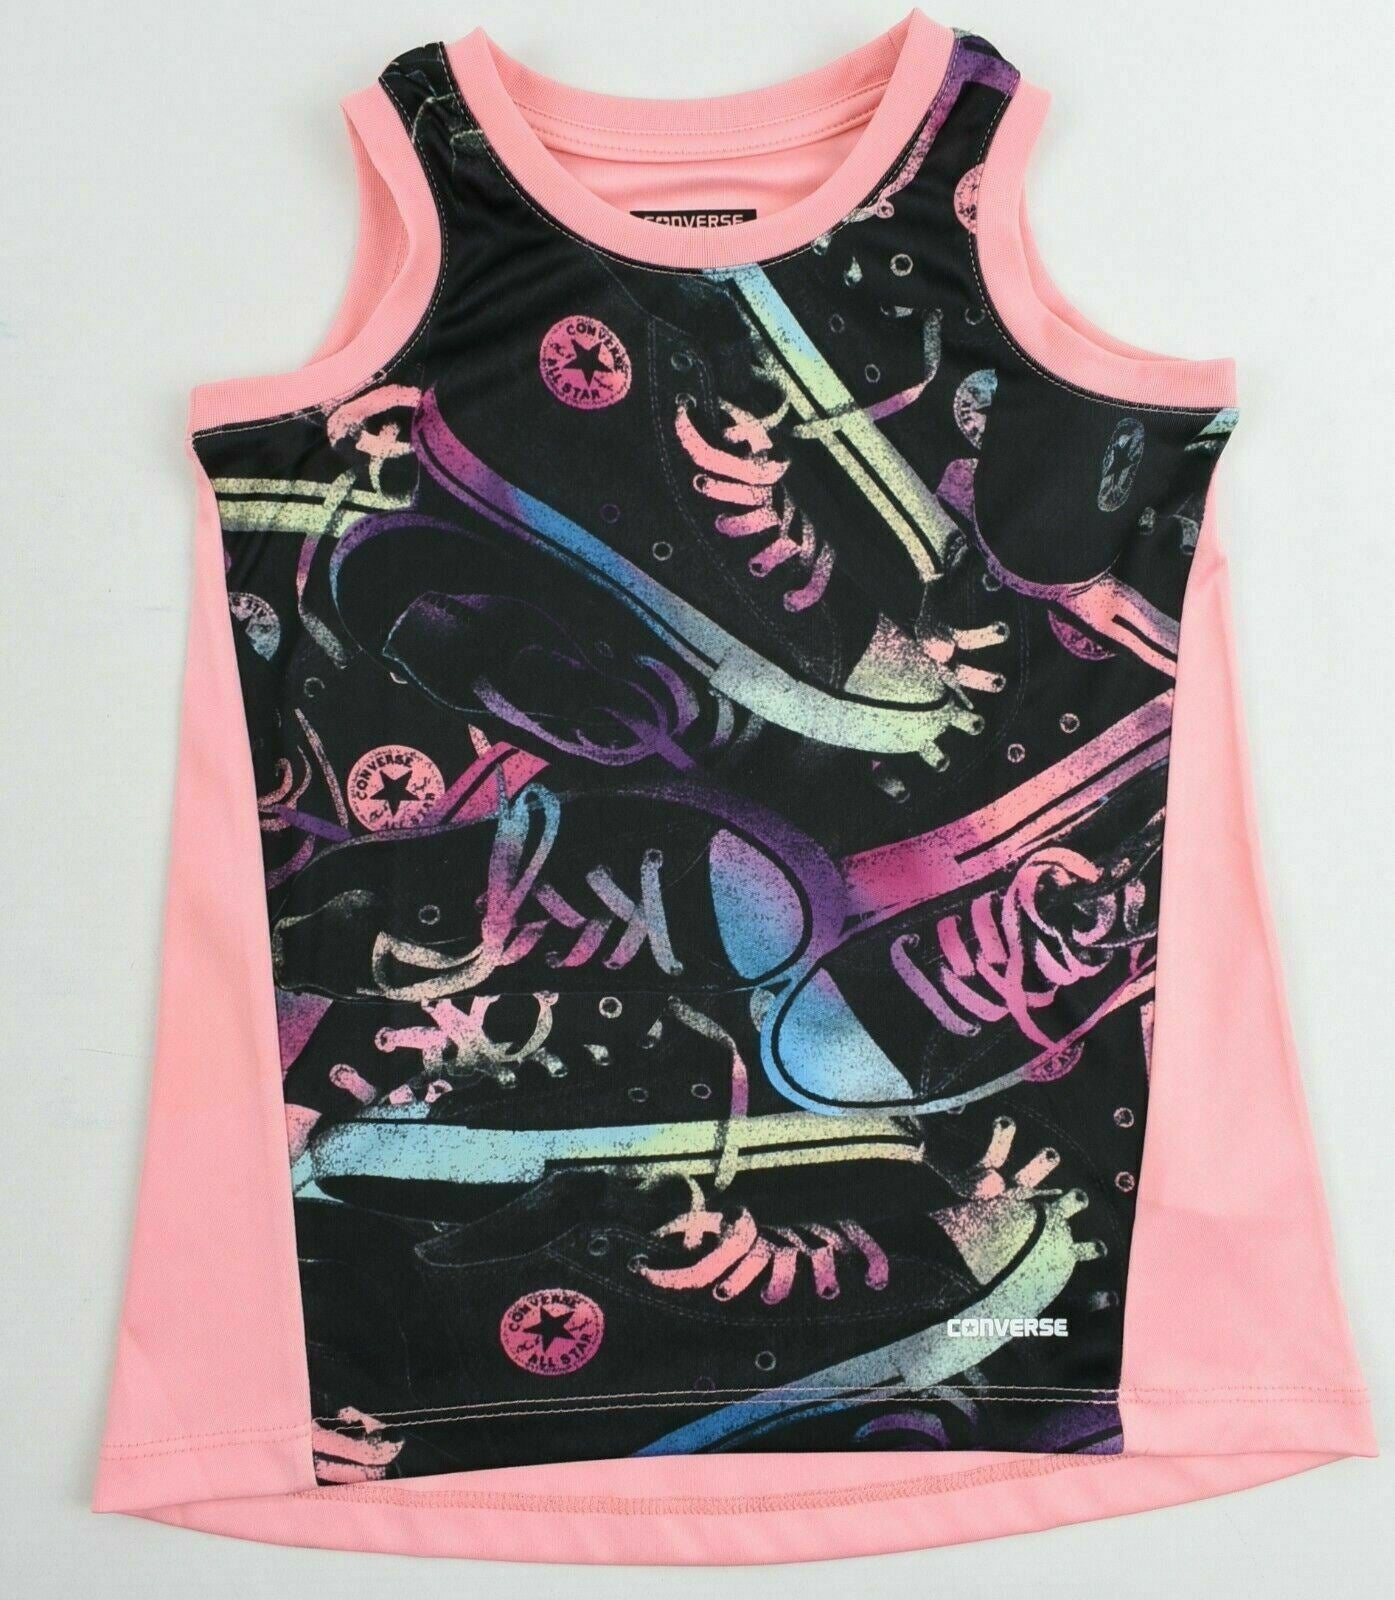 CONVERSE Girls' Kids' Pink & Graphic Print Vest Top Tank Top, 5 years to 6 years